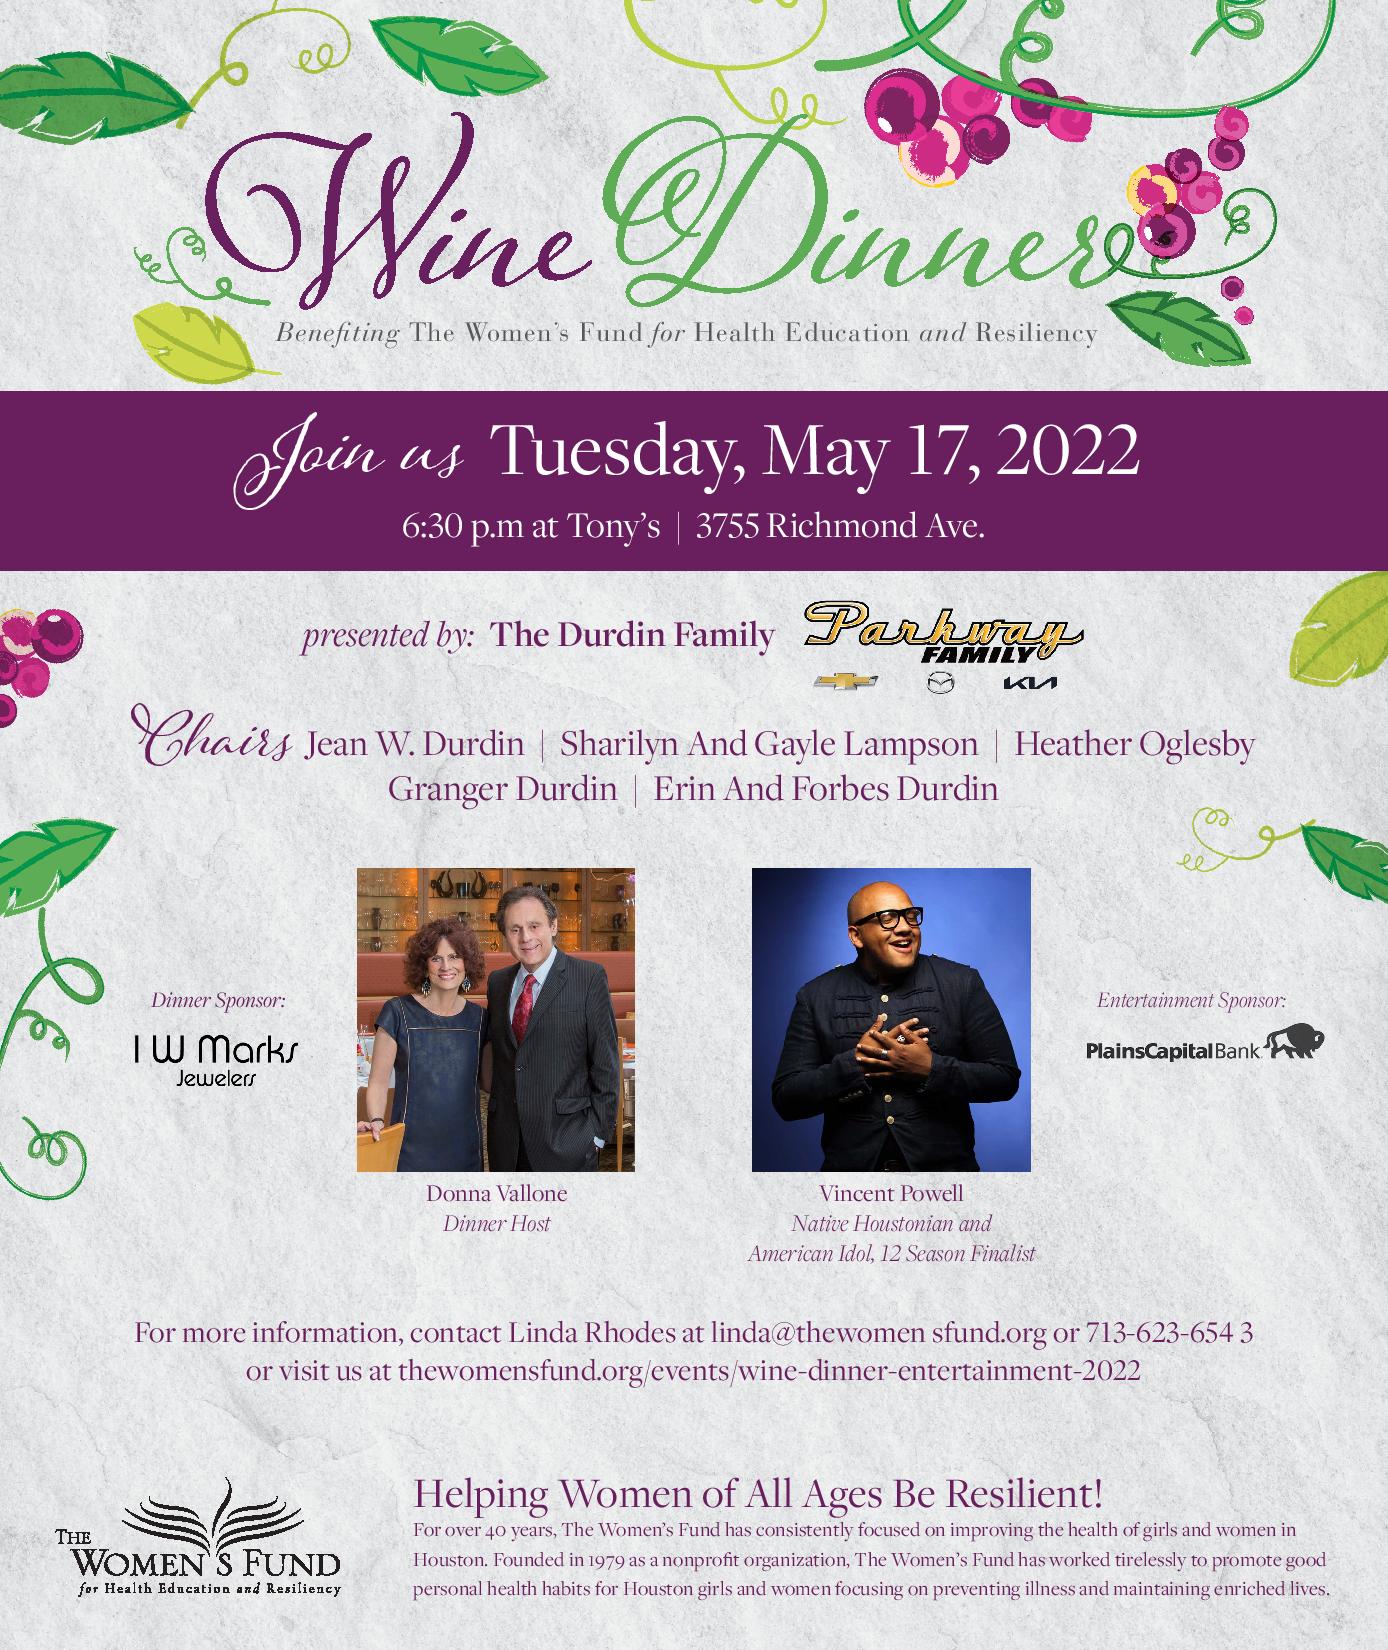 7th Annual Wine Dinner Presented by The Durdin Family